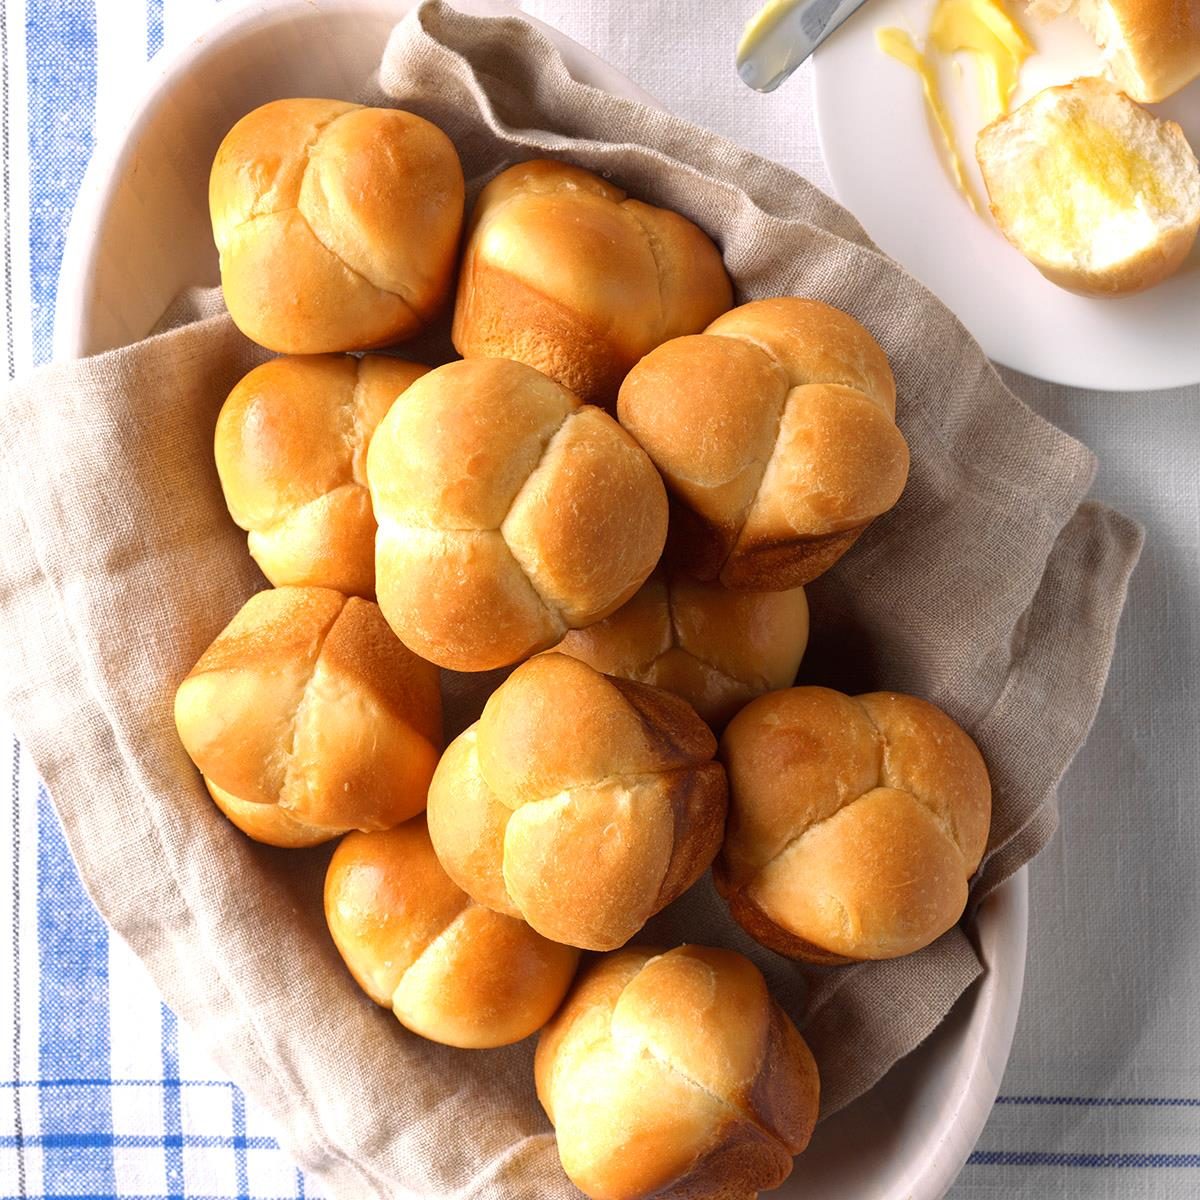 30 Homemade Roll Recipes That Are Sure To Please Taste Of Home